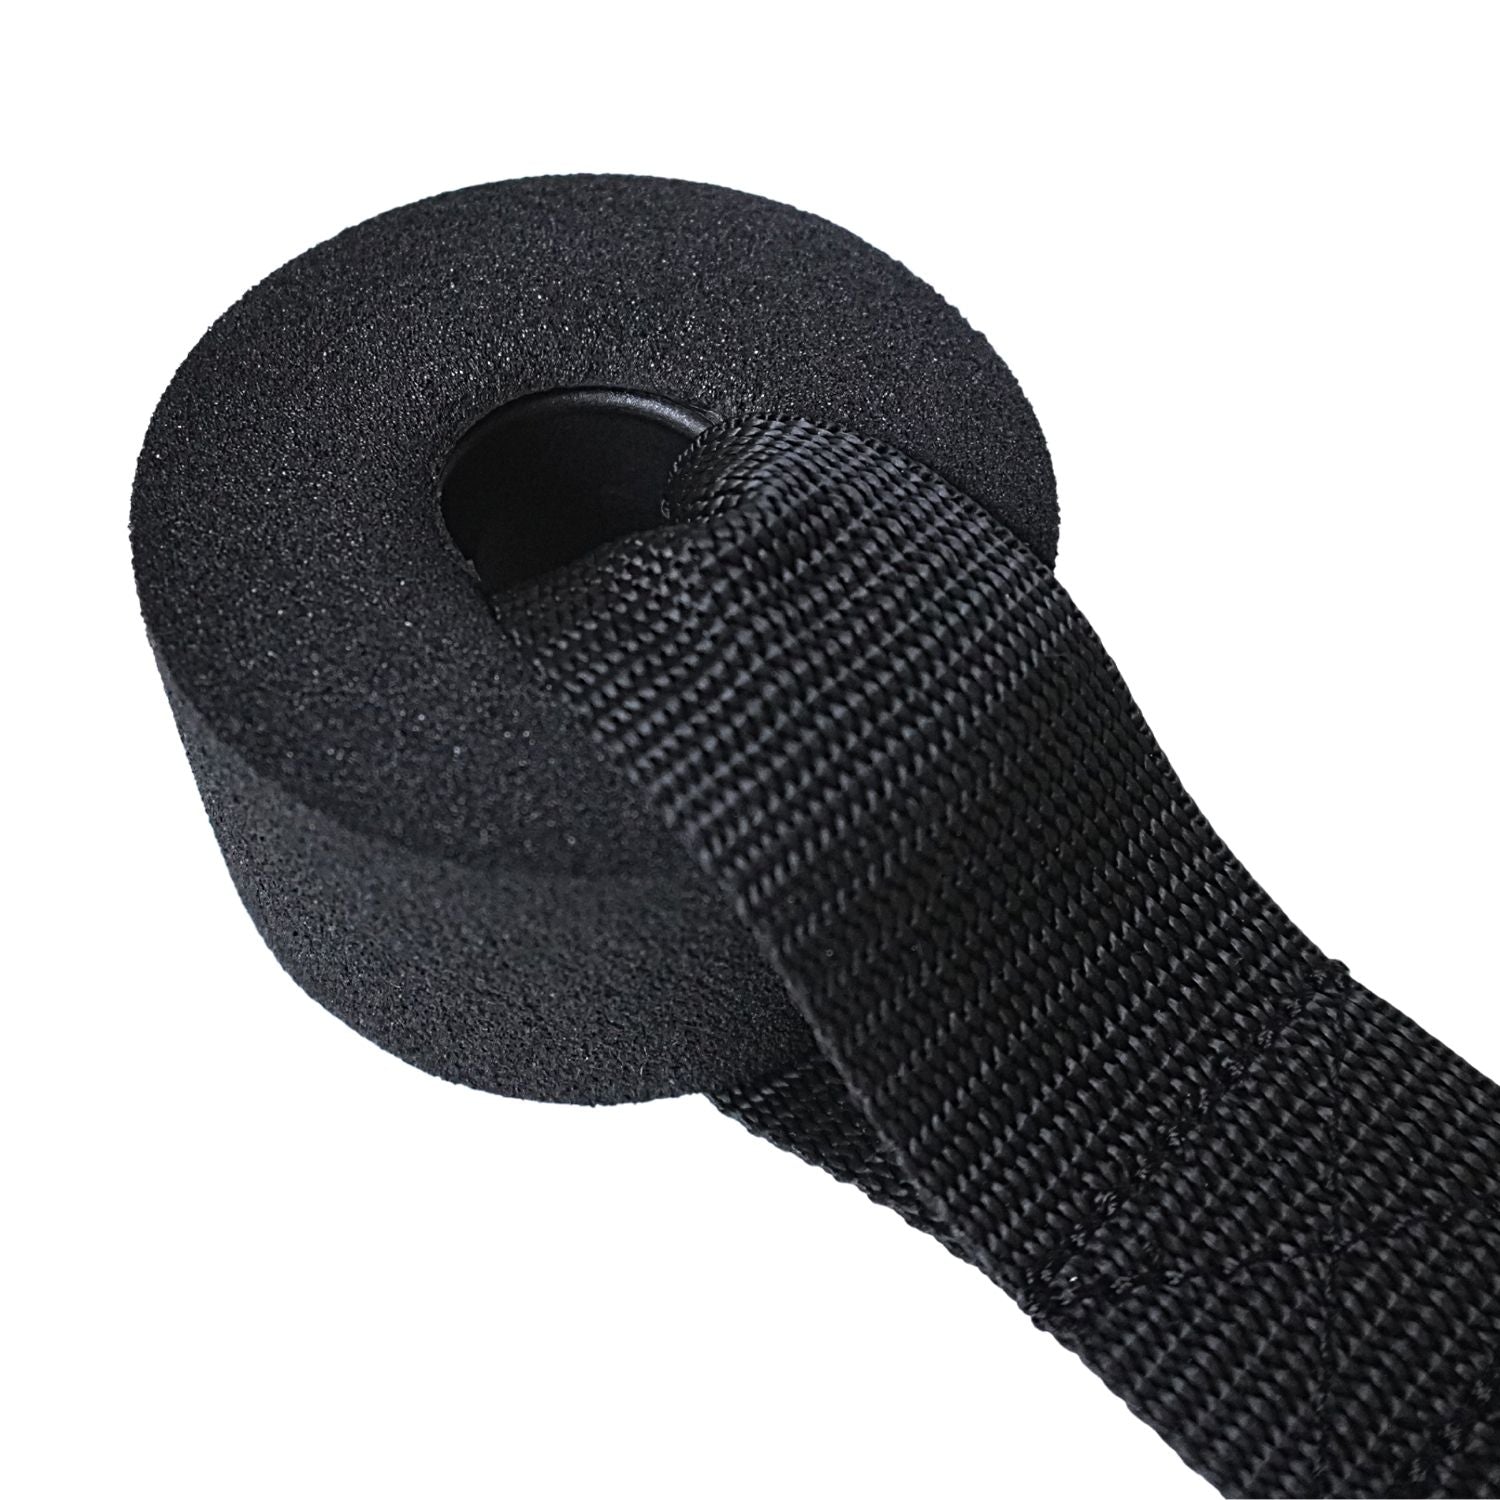 FitWay Equip. Heavy Duty Resistance Band - Black